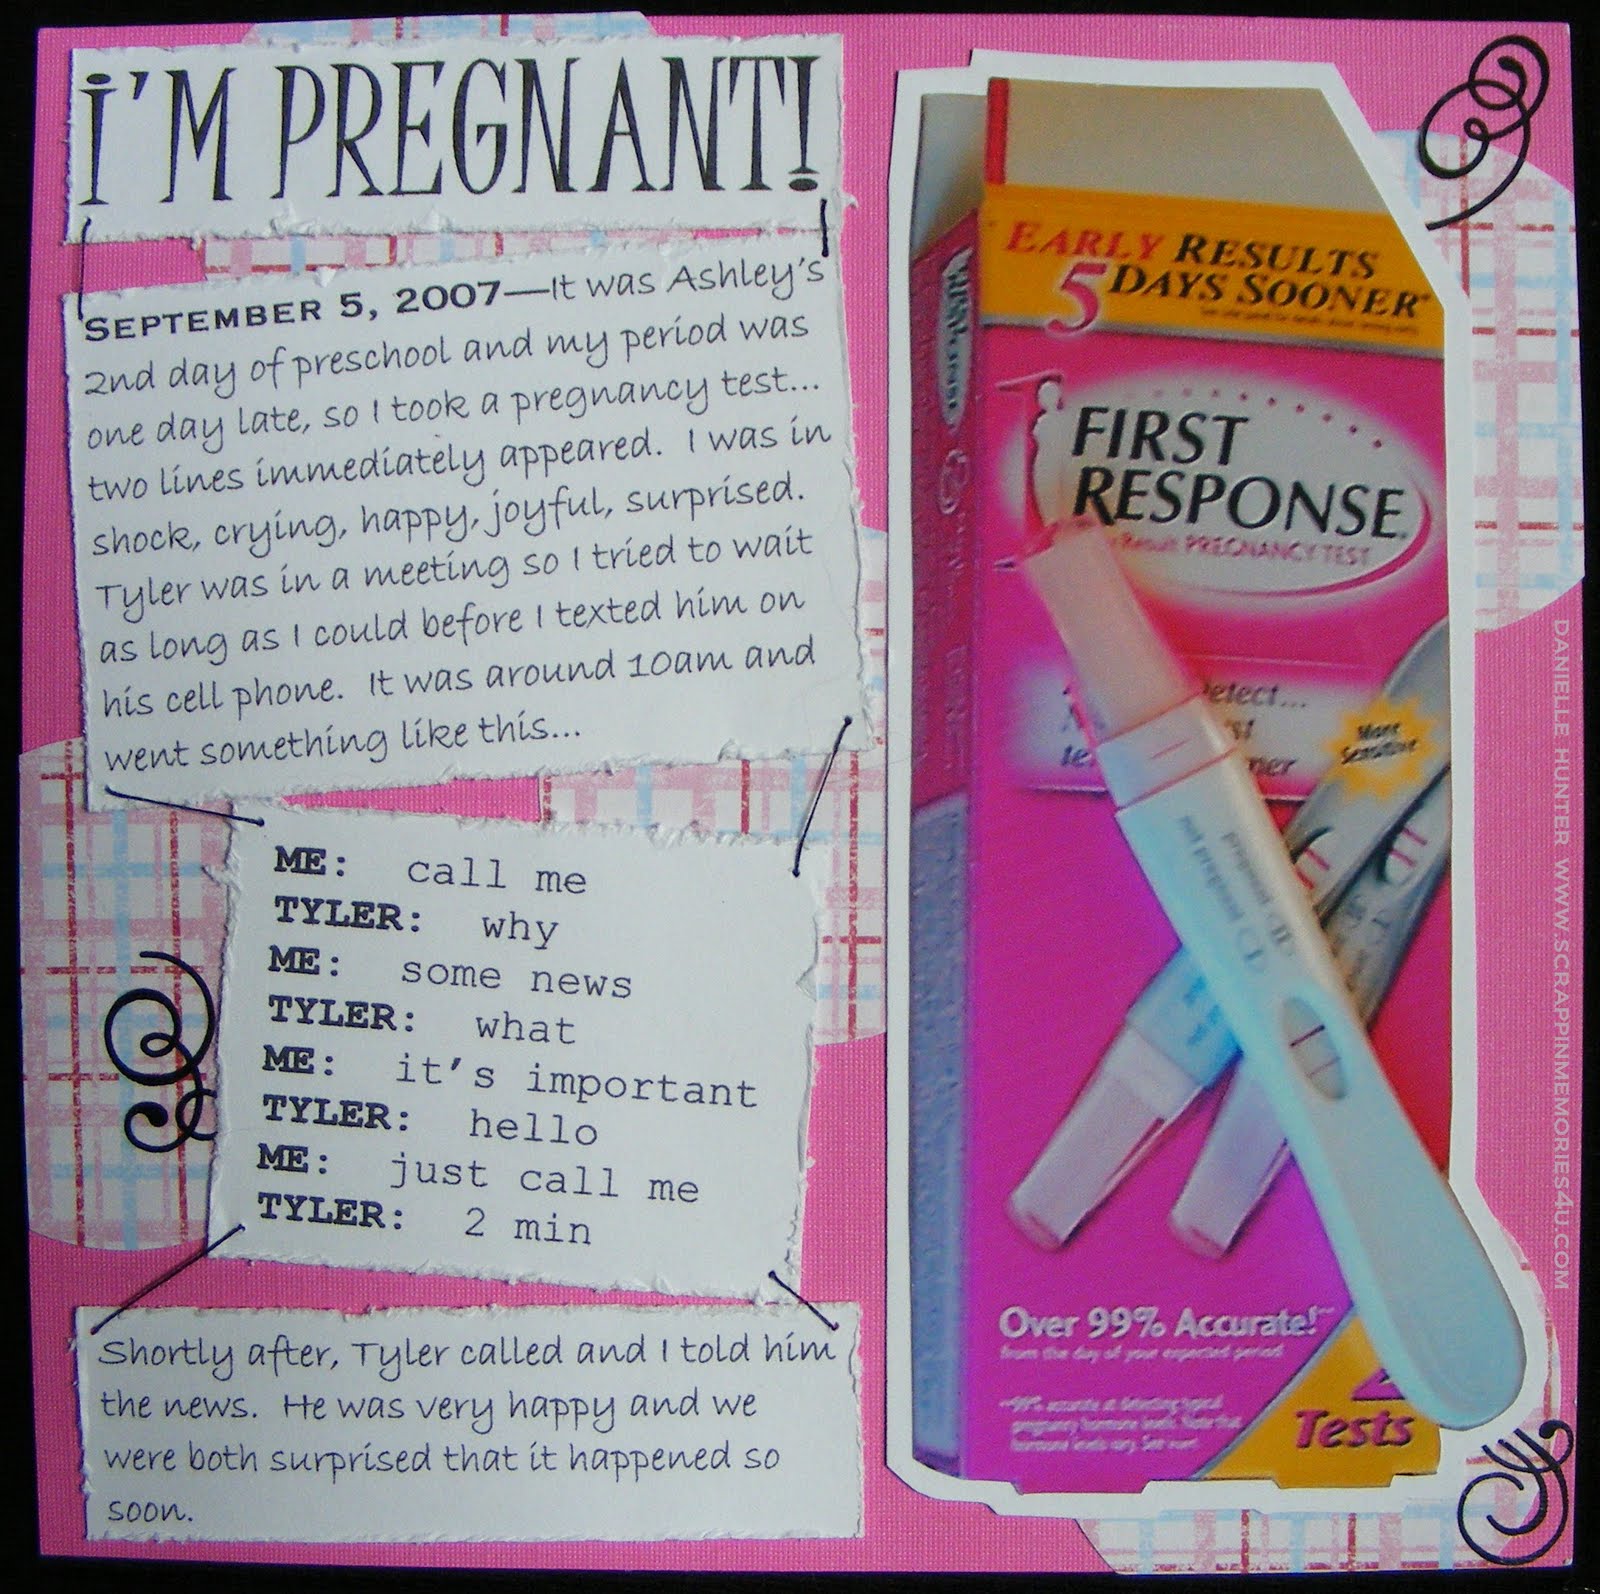 Pregnant single mom advice blog, pregnancy age 40 and over clubs, am i